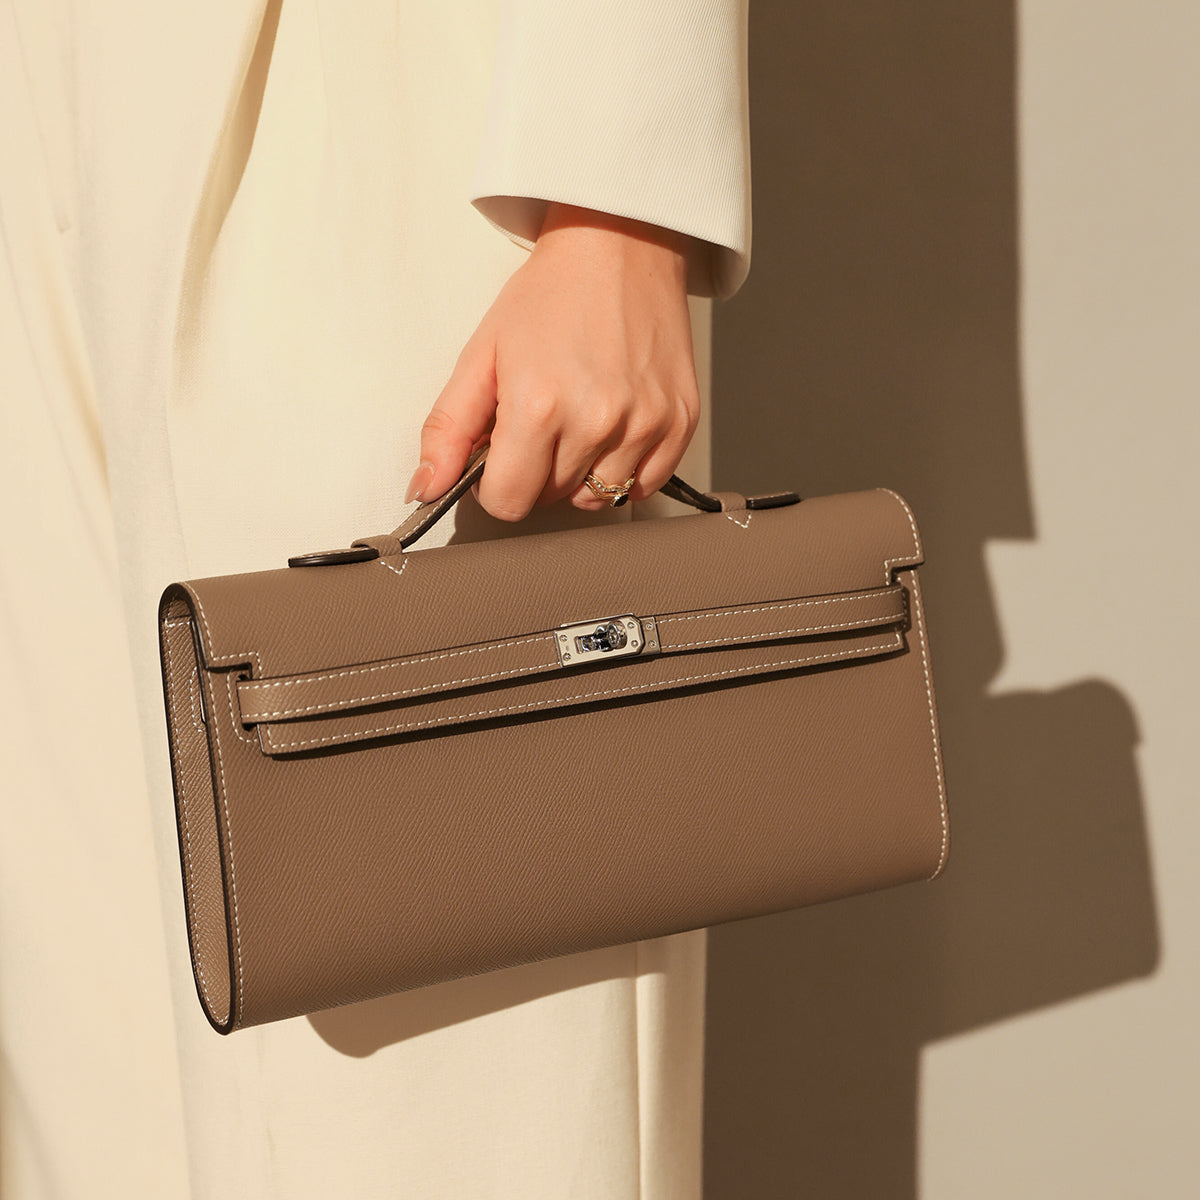 top-handle-leather-clutch-bag-with-silver-hardware_taupe_6.jpg